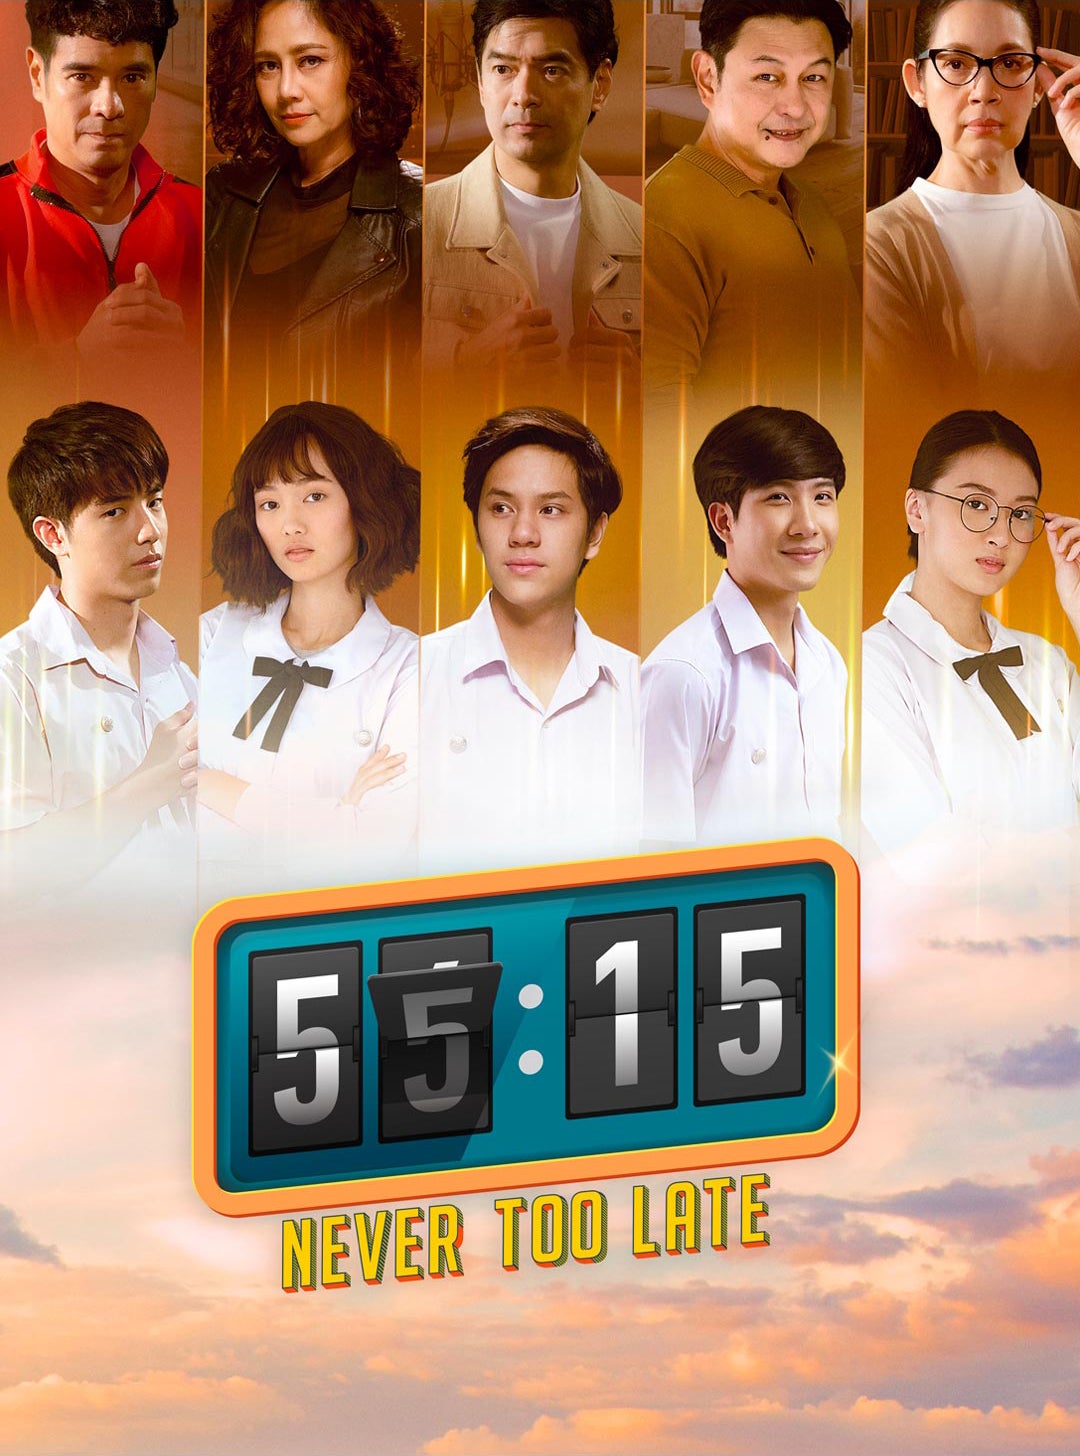 TV ratings for 55:15 Never Too Late in Malaysia. Disney+ TV series